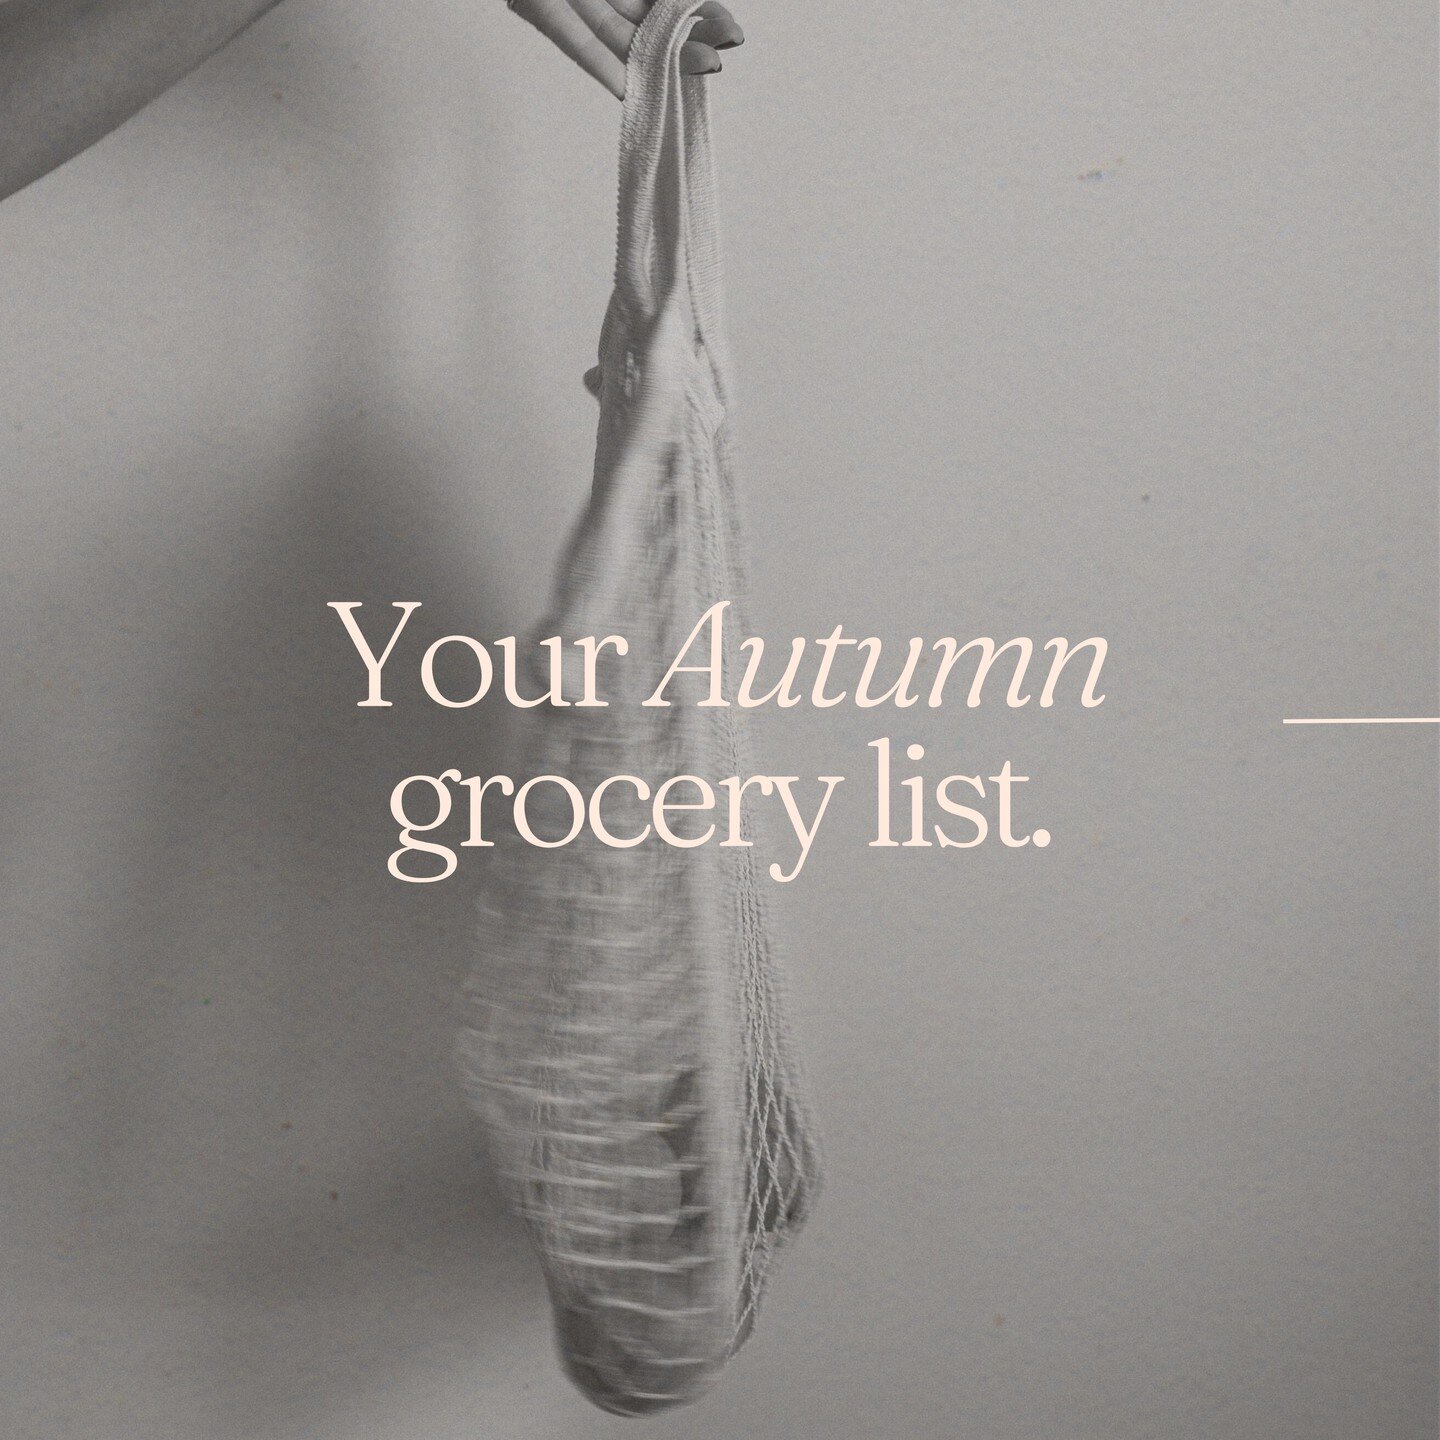 Your Eat Shed Glow&trade; practical grocery list ☝️

Surrounding yourself with mostly the right foods is KEY to kick-start a sustainable weight loss journey. 

Here's your Autumn grocery list for you to navigate aisle per aisle like a nutrition pro, 